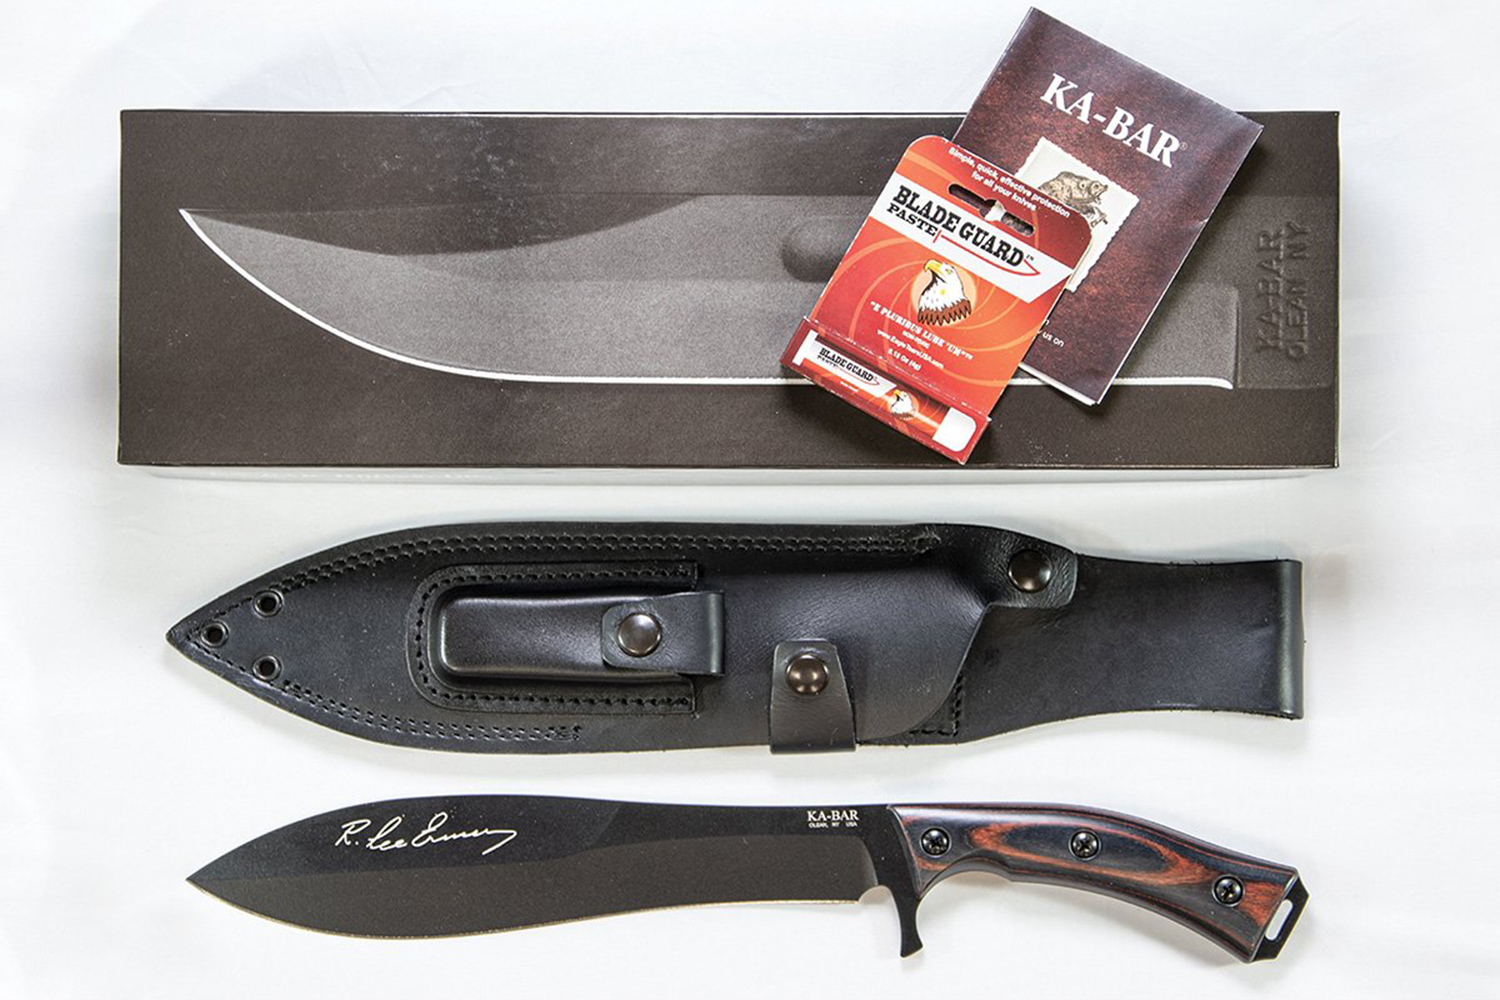 KA-BARS Gunny Knife Is a Survival Blade Designed By the Legendary R